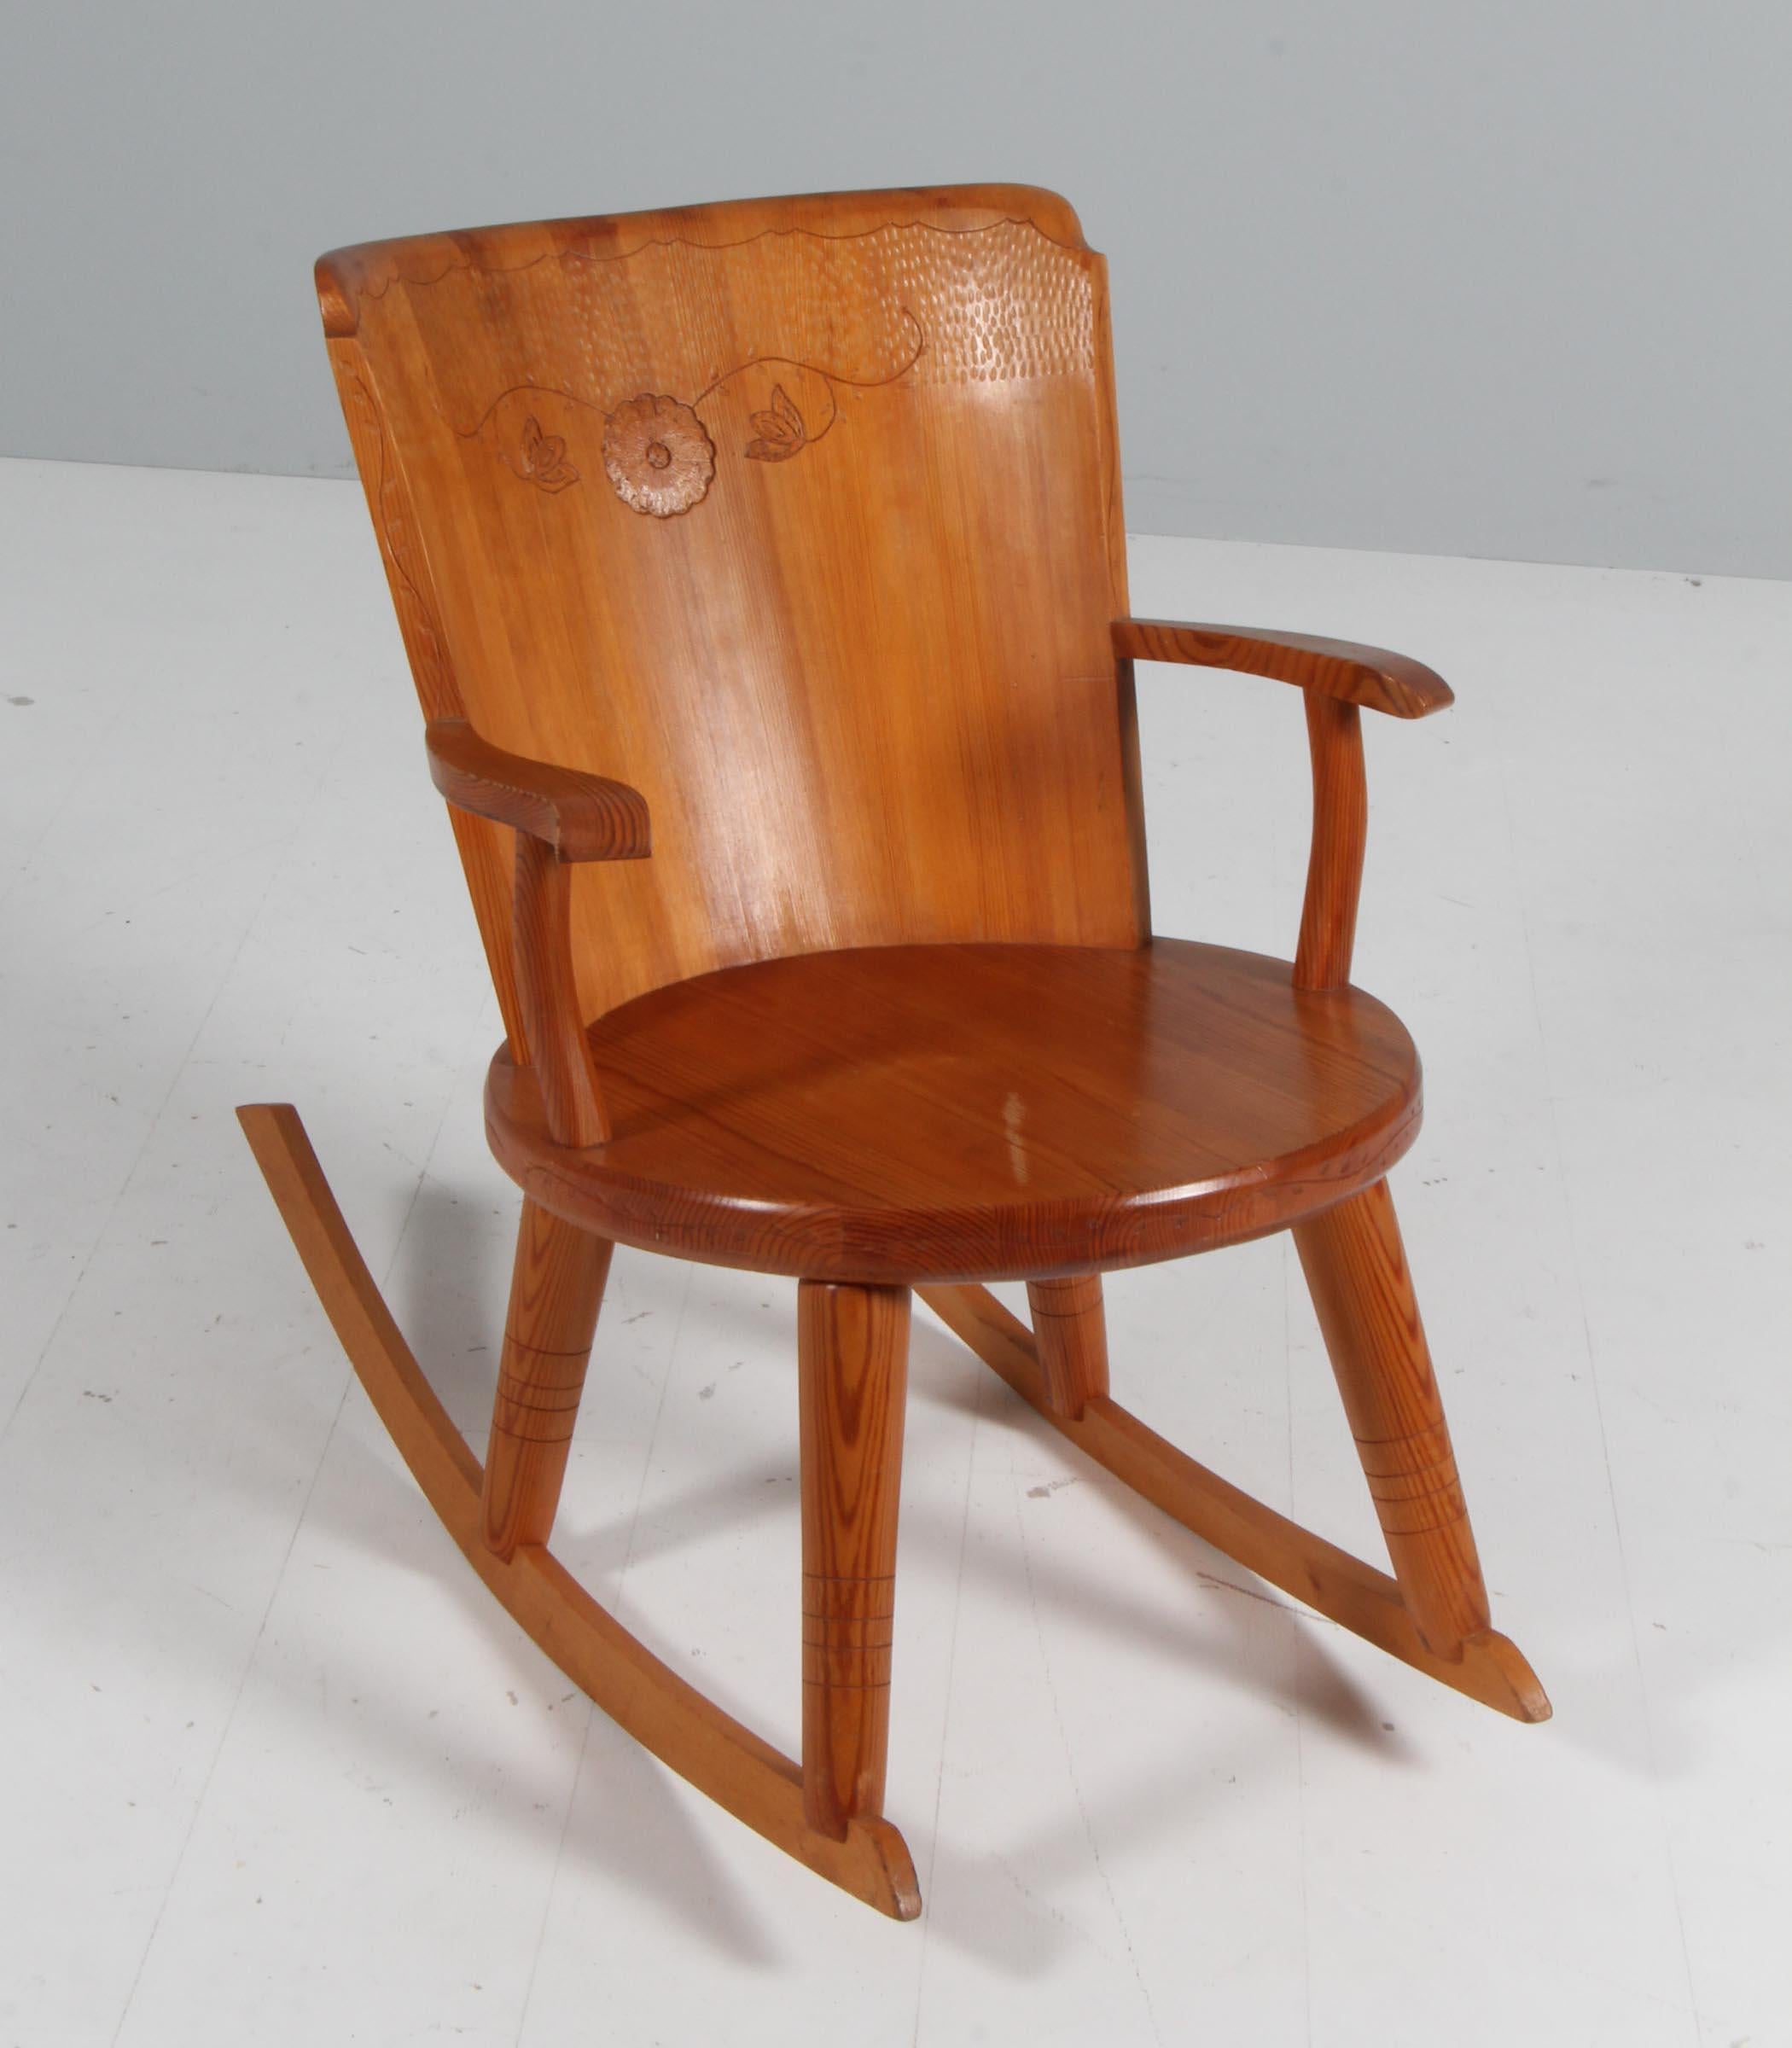 Rocking chair made of solid pine, with carved details.

Made in Sweden in the 1970s